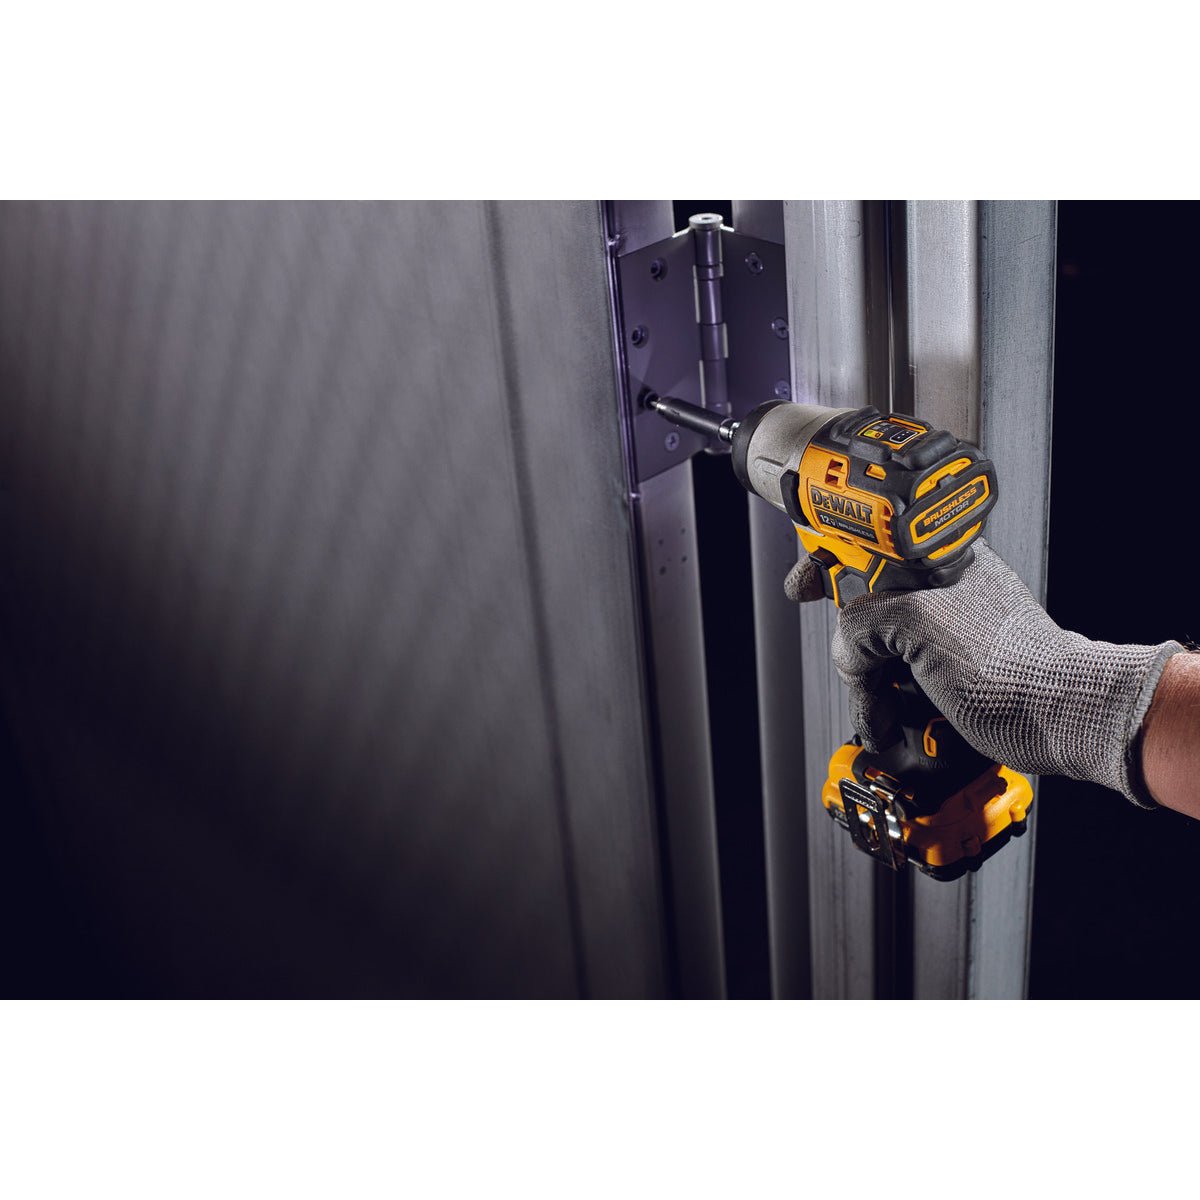 DEWALT DCF801B - XTREME™ 12V MAX* BRUSHLESS 1/4 IN. CORDLESS IMPACT DRIVER (TOOL ONLY)